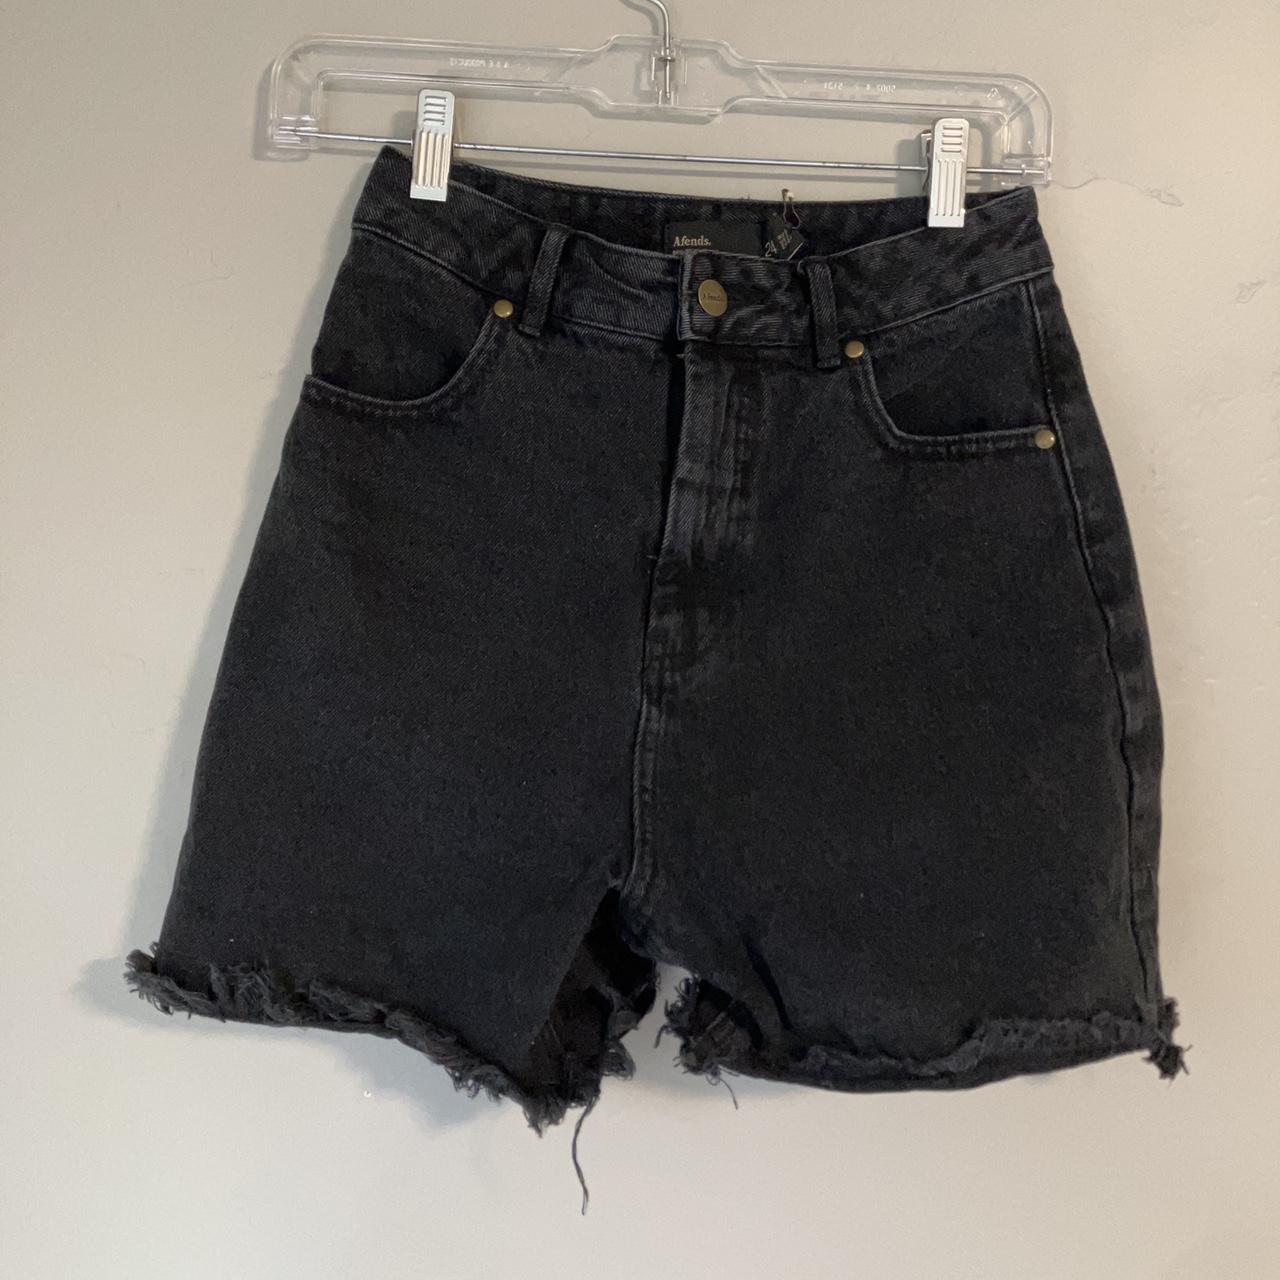 Afends Women's Black and Grey Shorts (2)